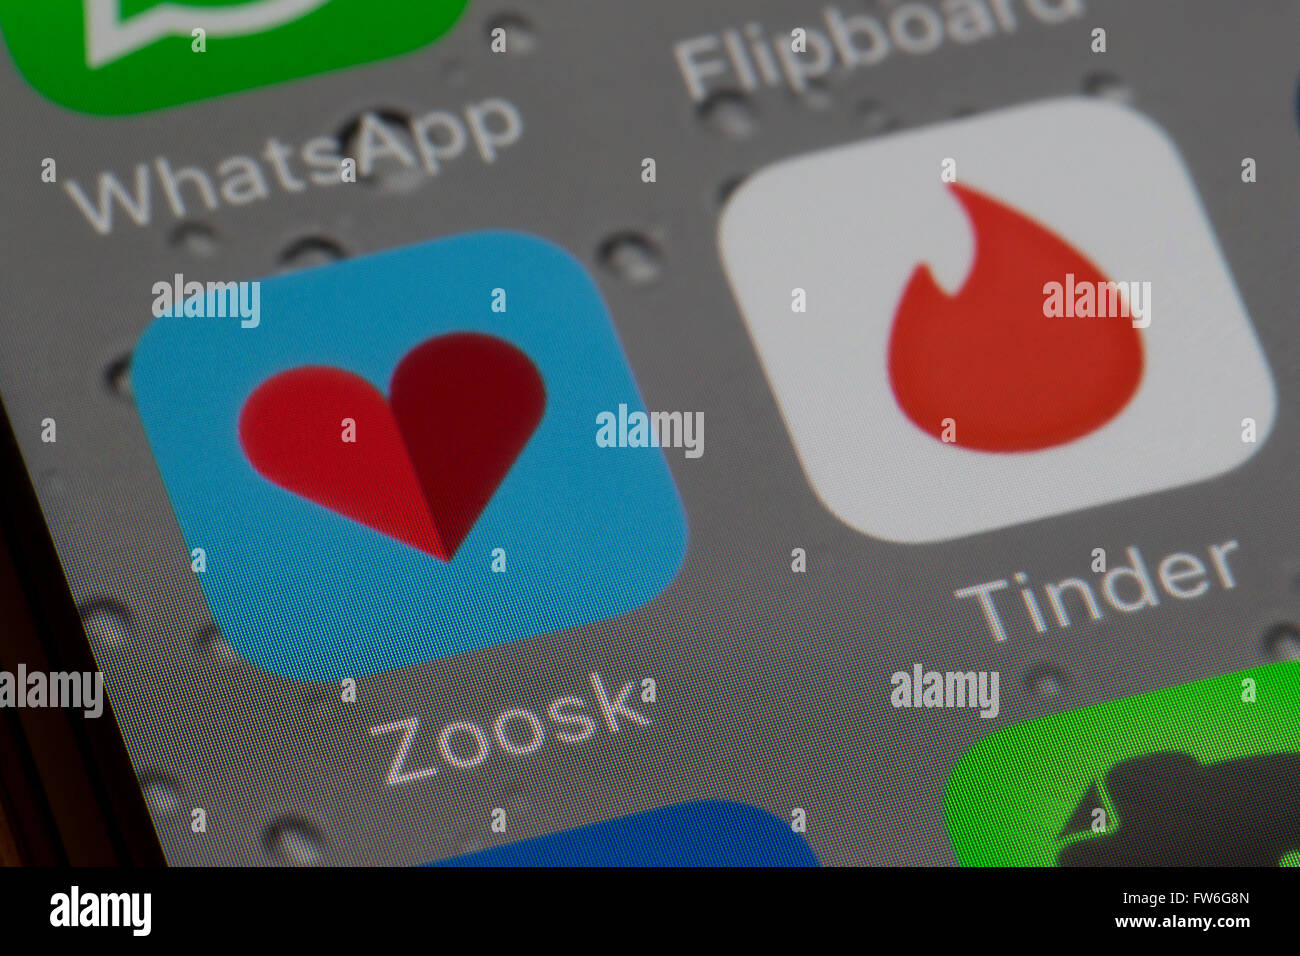 Tinder and Zoosk internet dating apps. Stock Photo